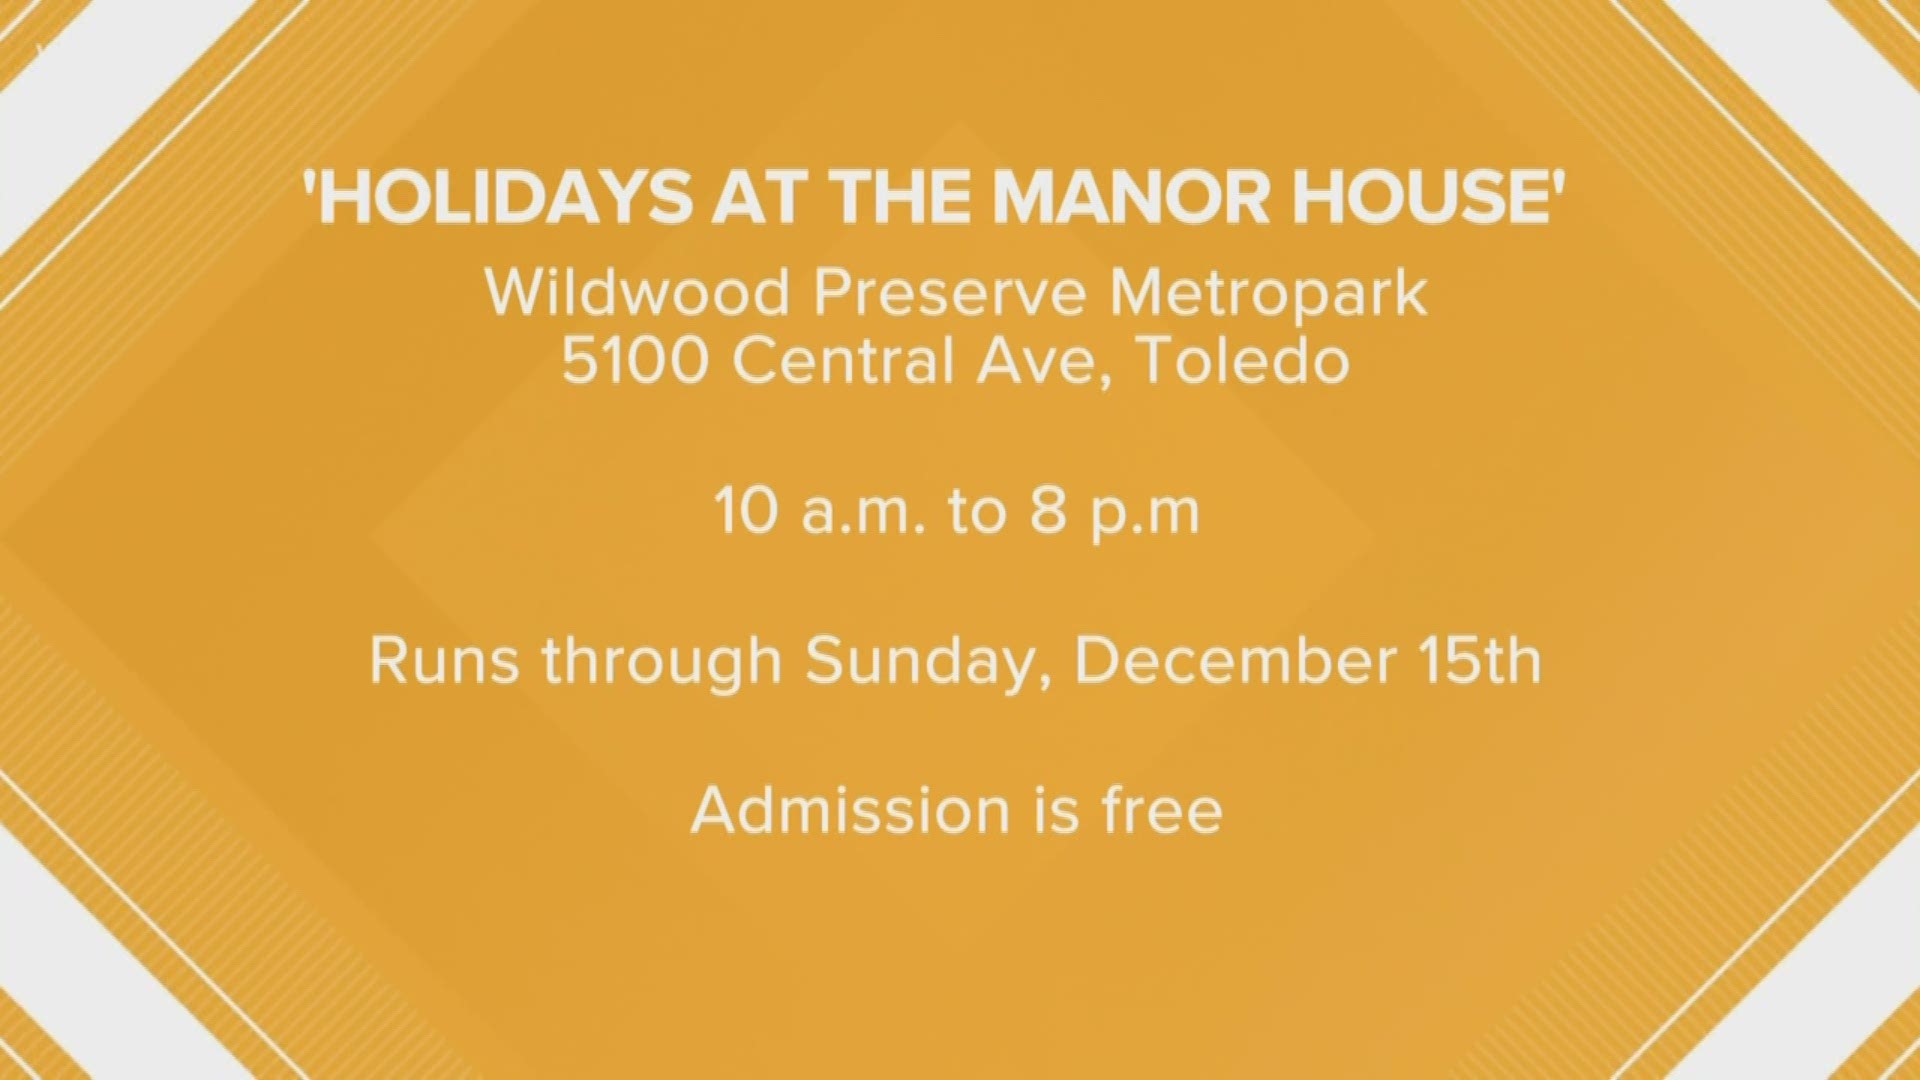 Holiday celebrations just started at the Manor House in west Toledo. Admissions are free.